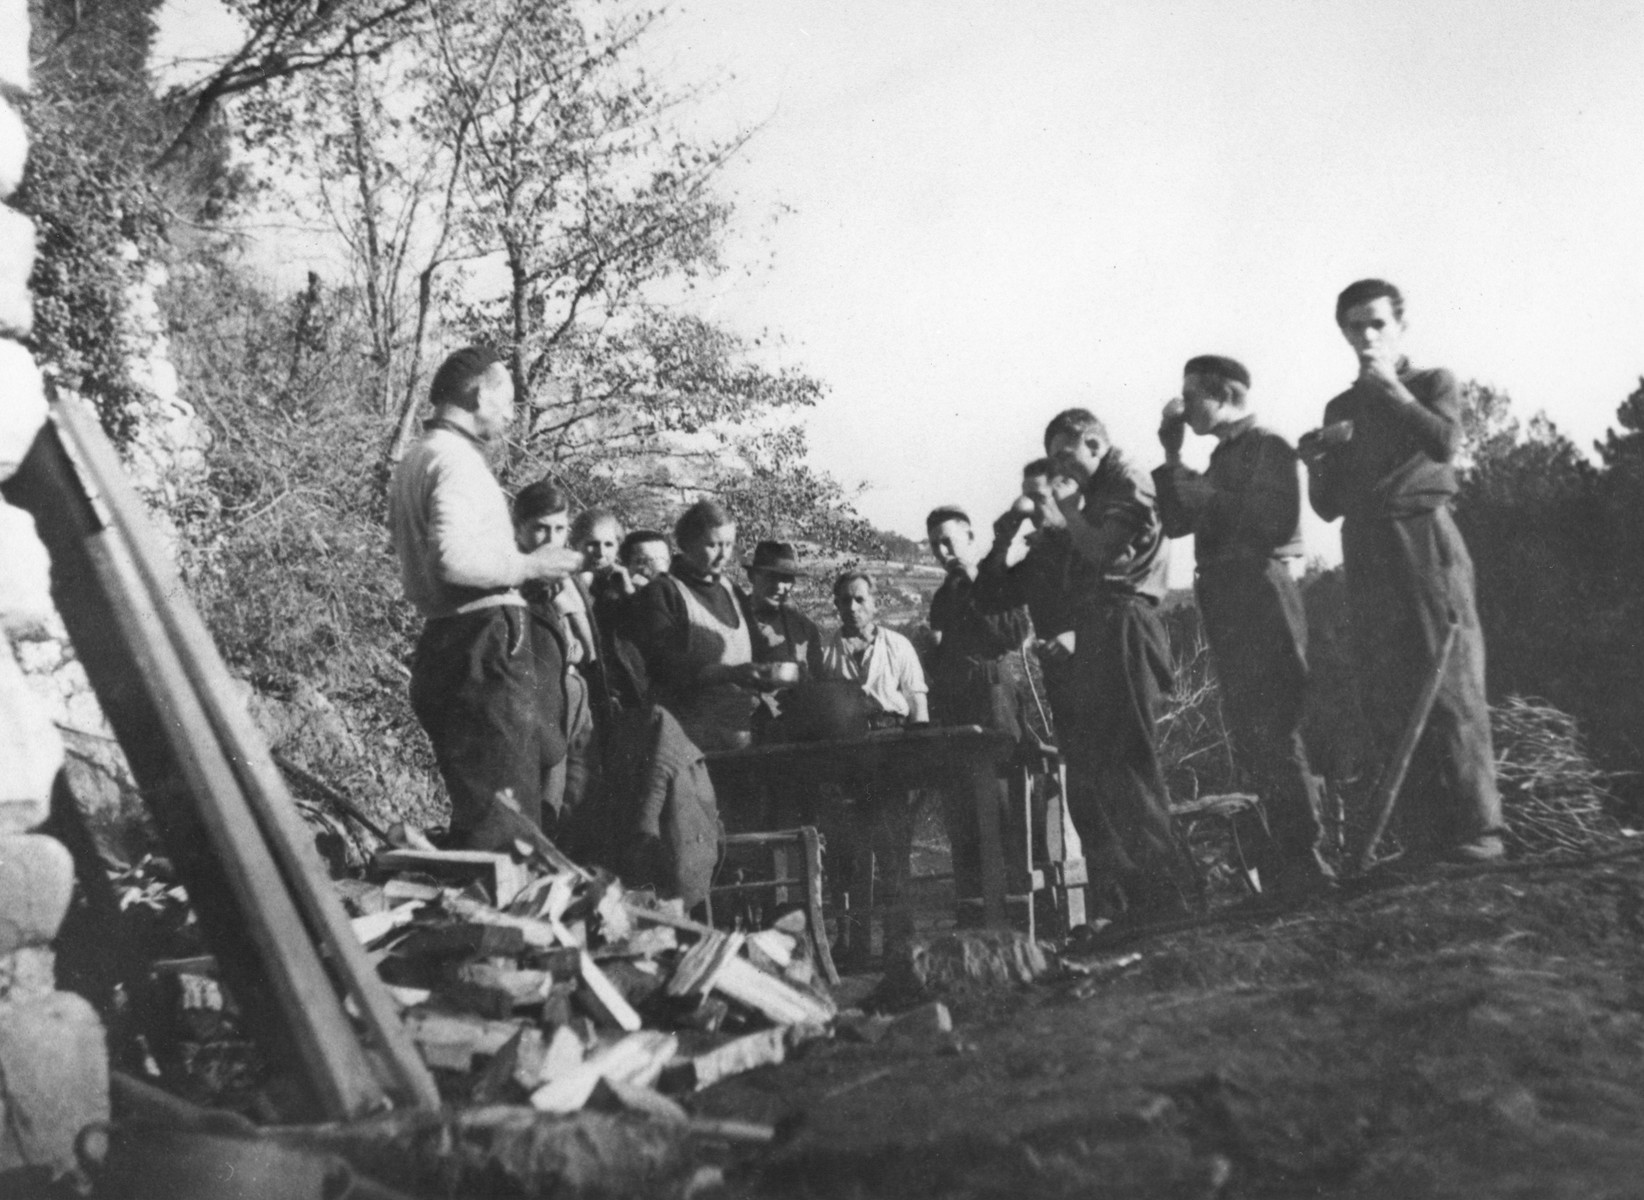 A group of Jewish teenagers stops for a snack on a farm near Vallon where they are hiding under the protection of MACE.